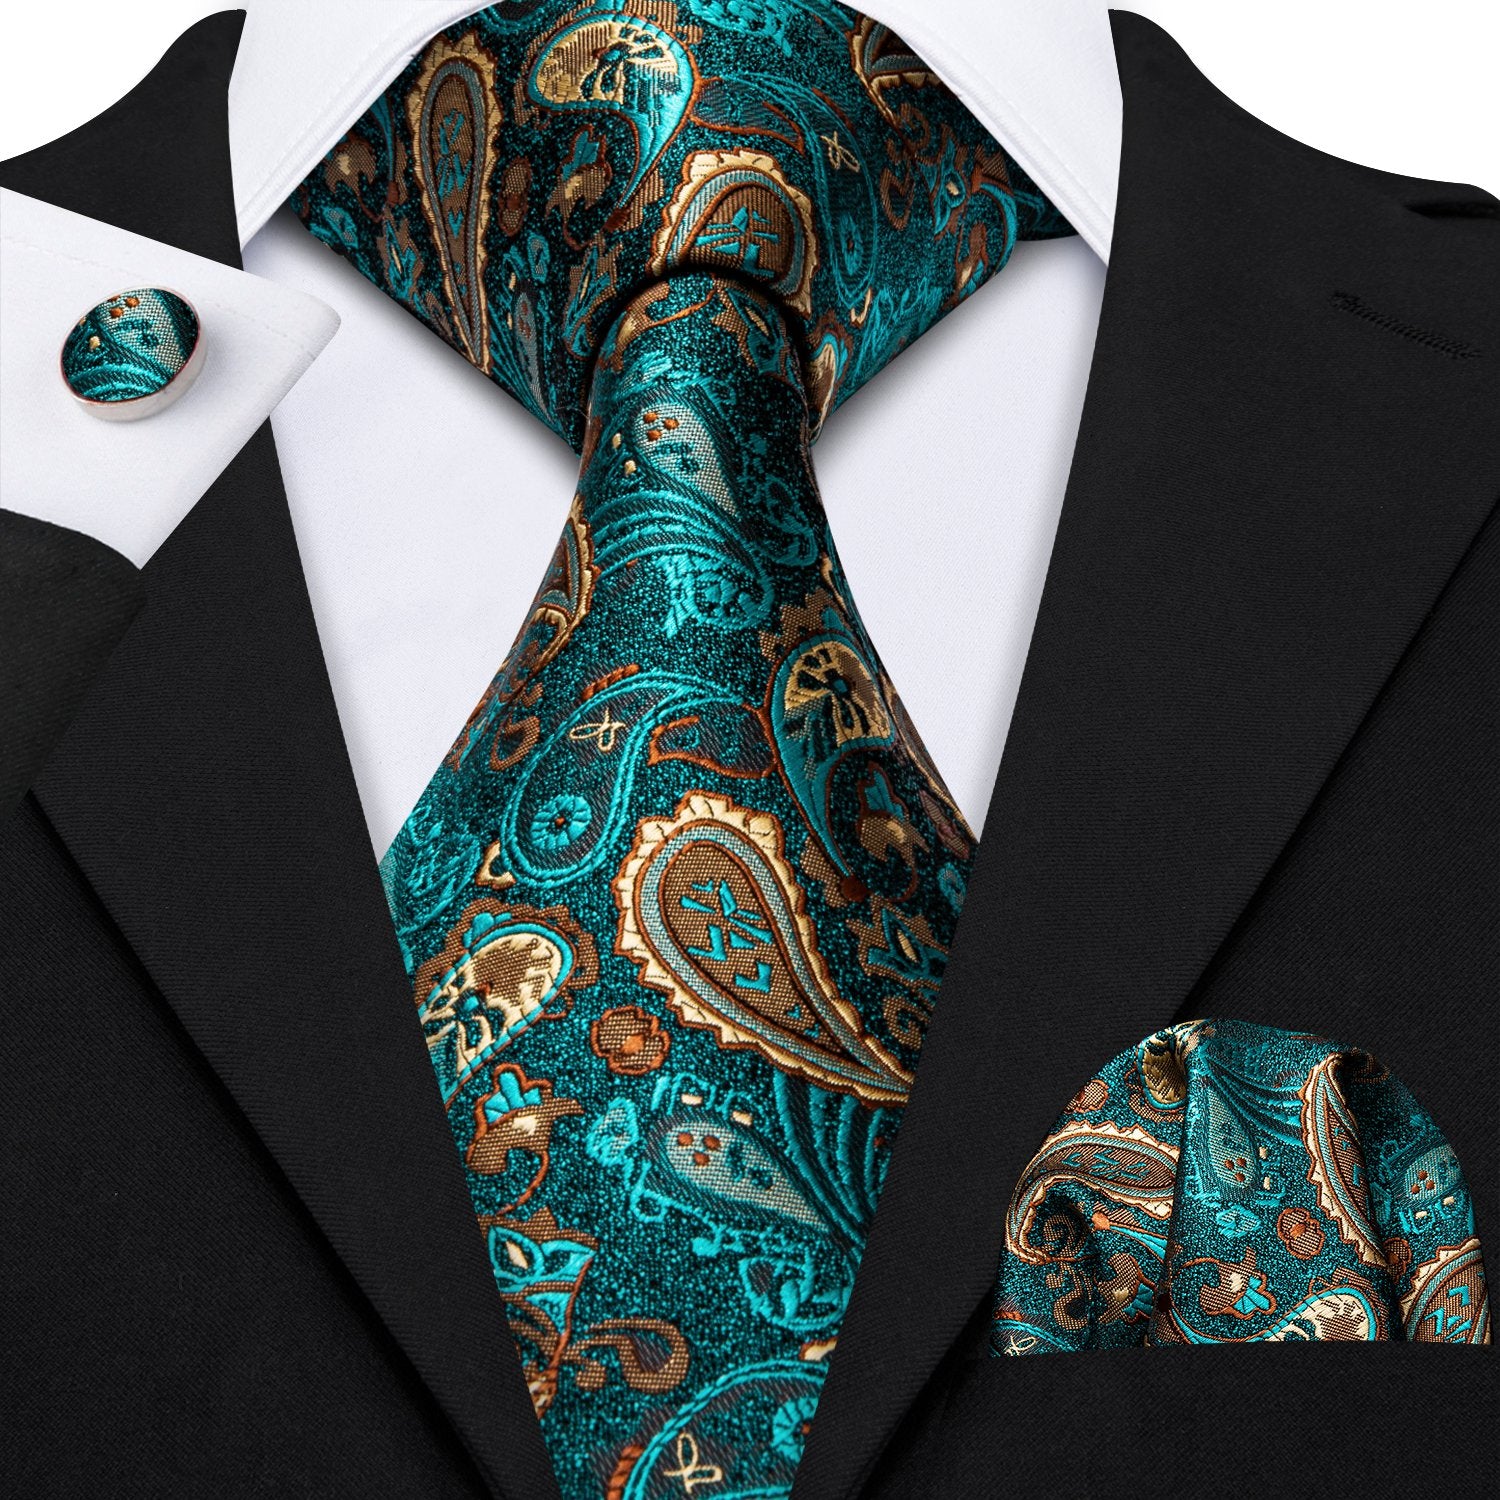 Barry.wang Men's Scarf Green Brown Paisley Silk Scarf with Tie Set